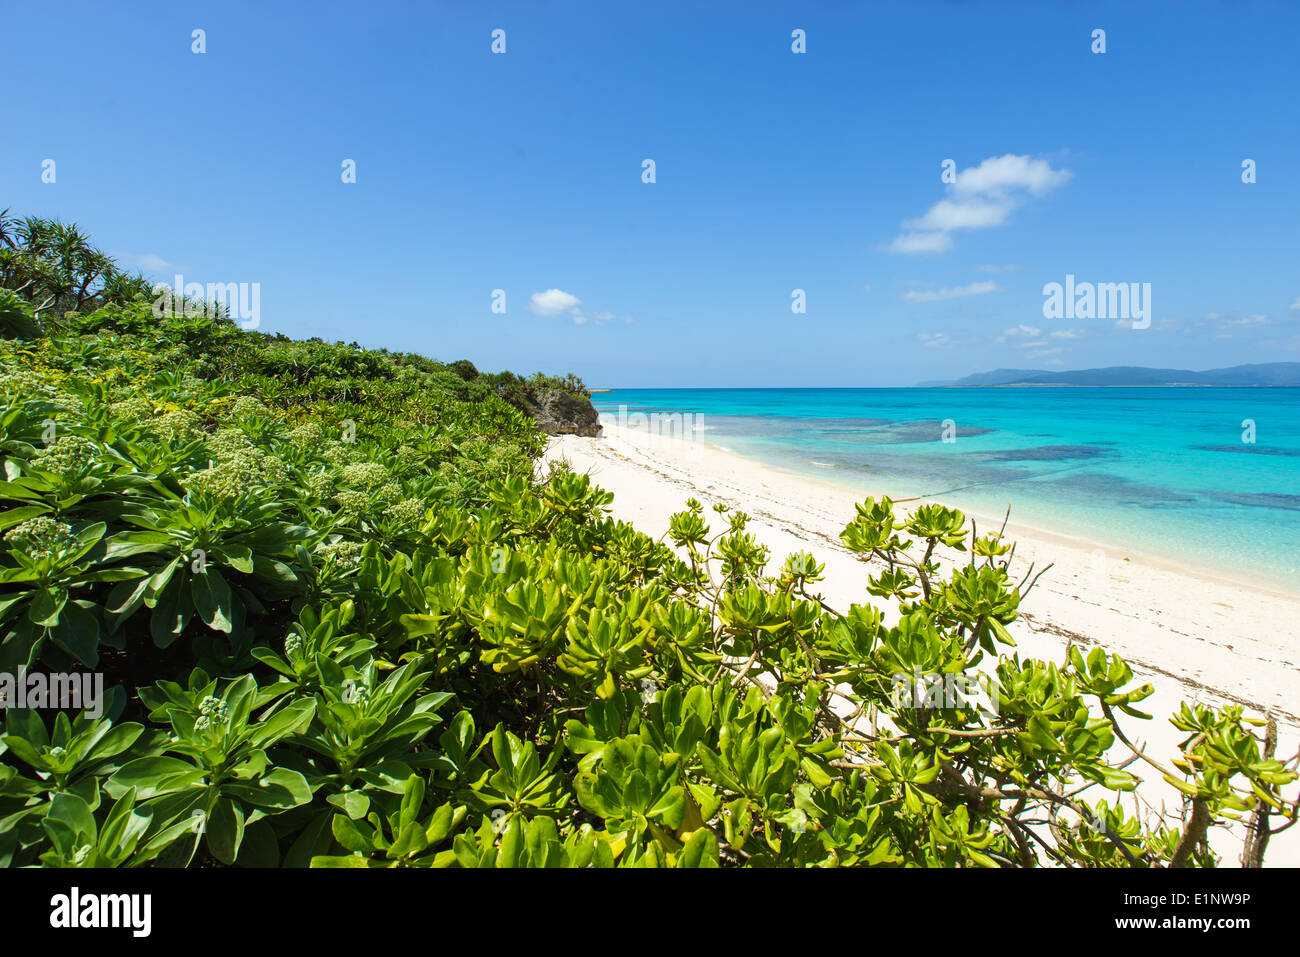 Stunning tropical beach surrounded by crystal clear tropical water full of coral reef in Okinawa, tropical Japan Stock Photo